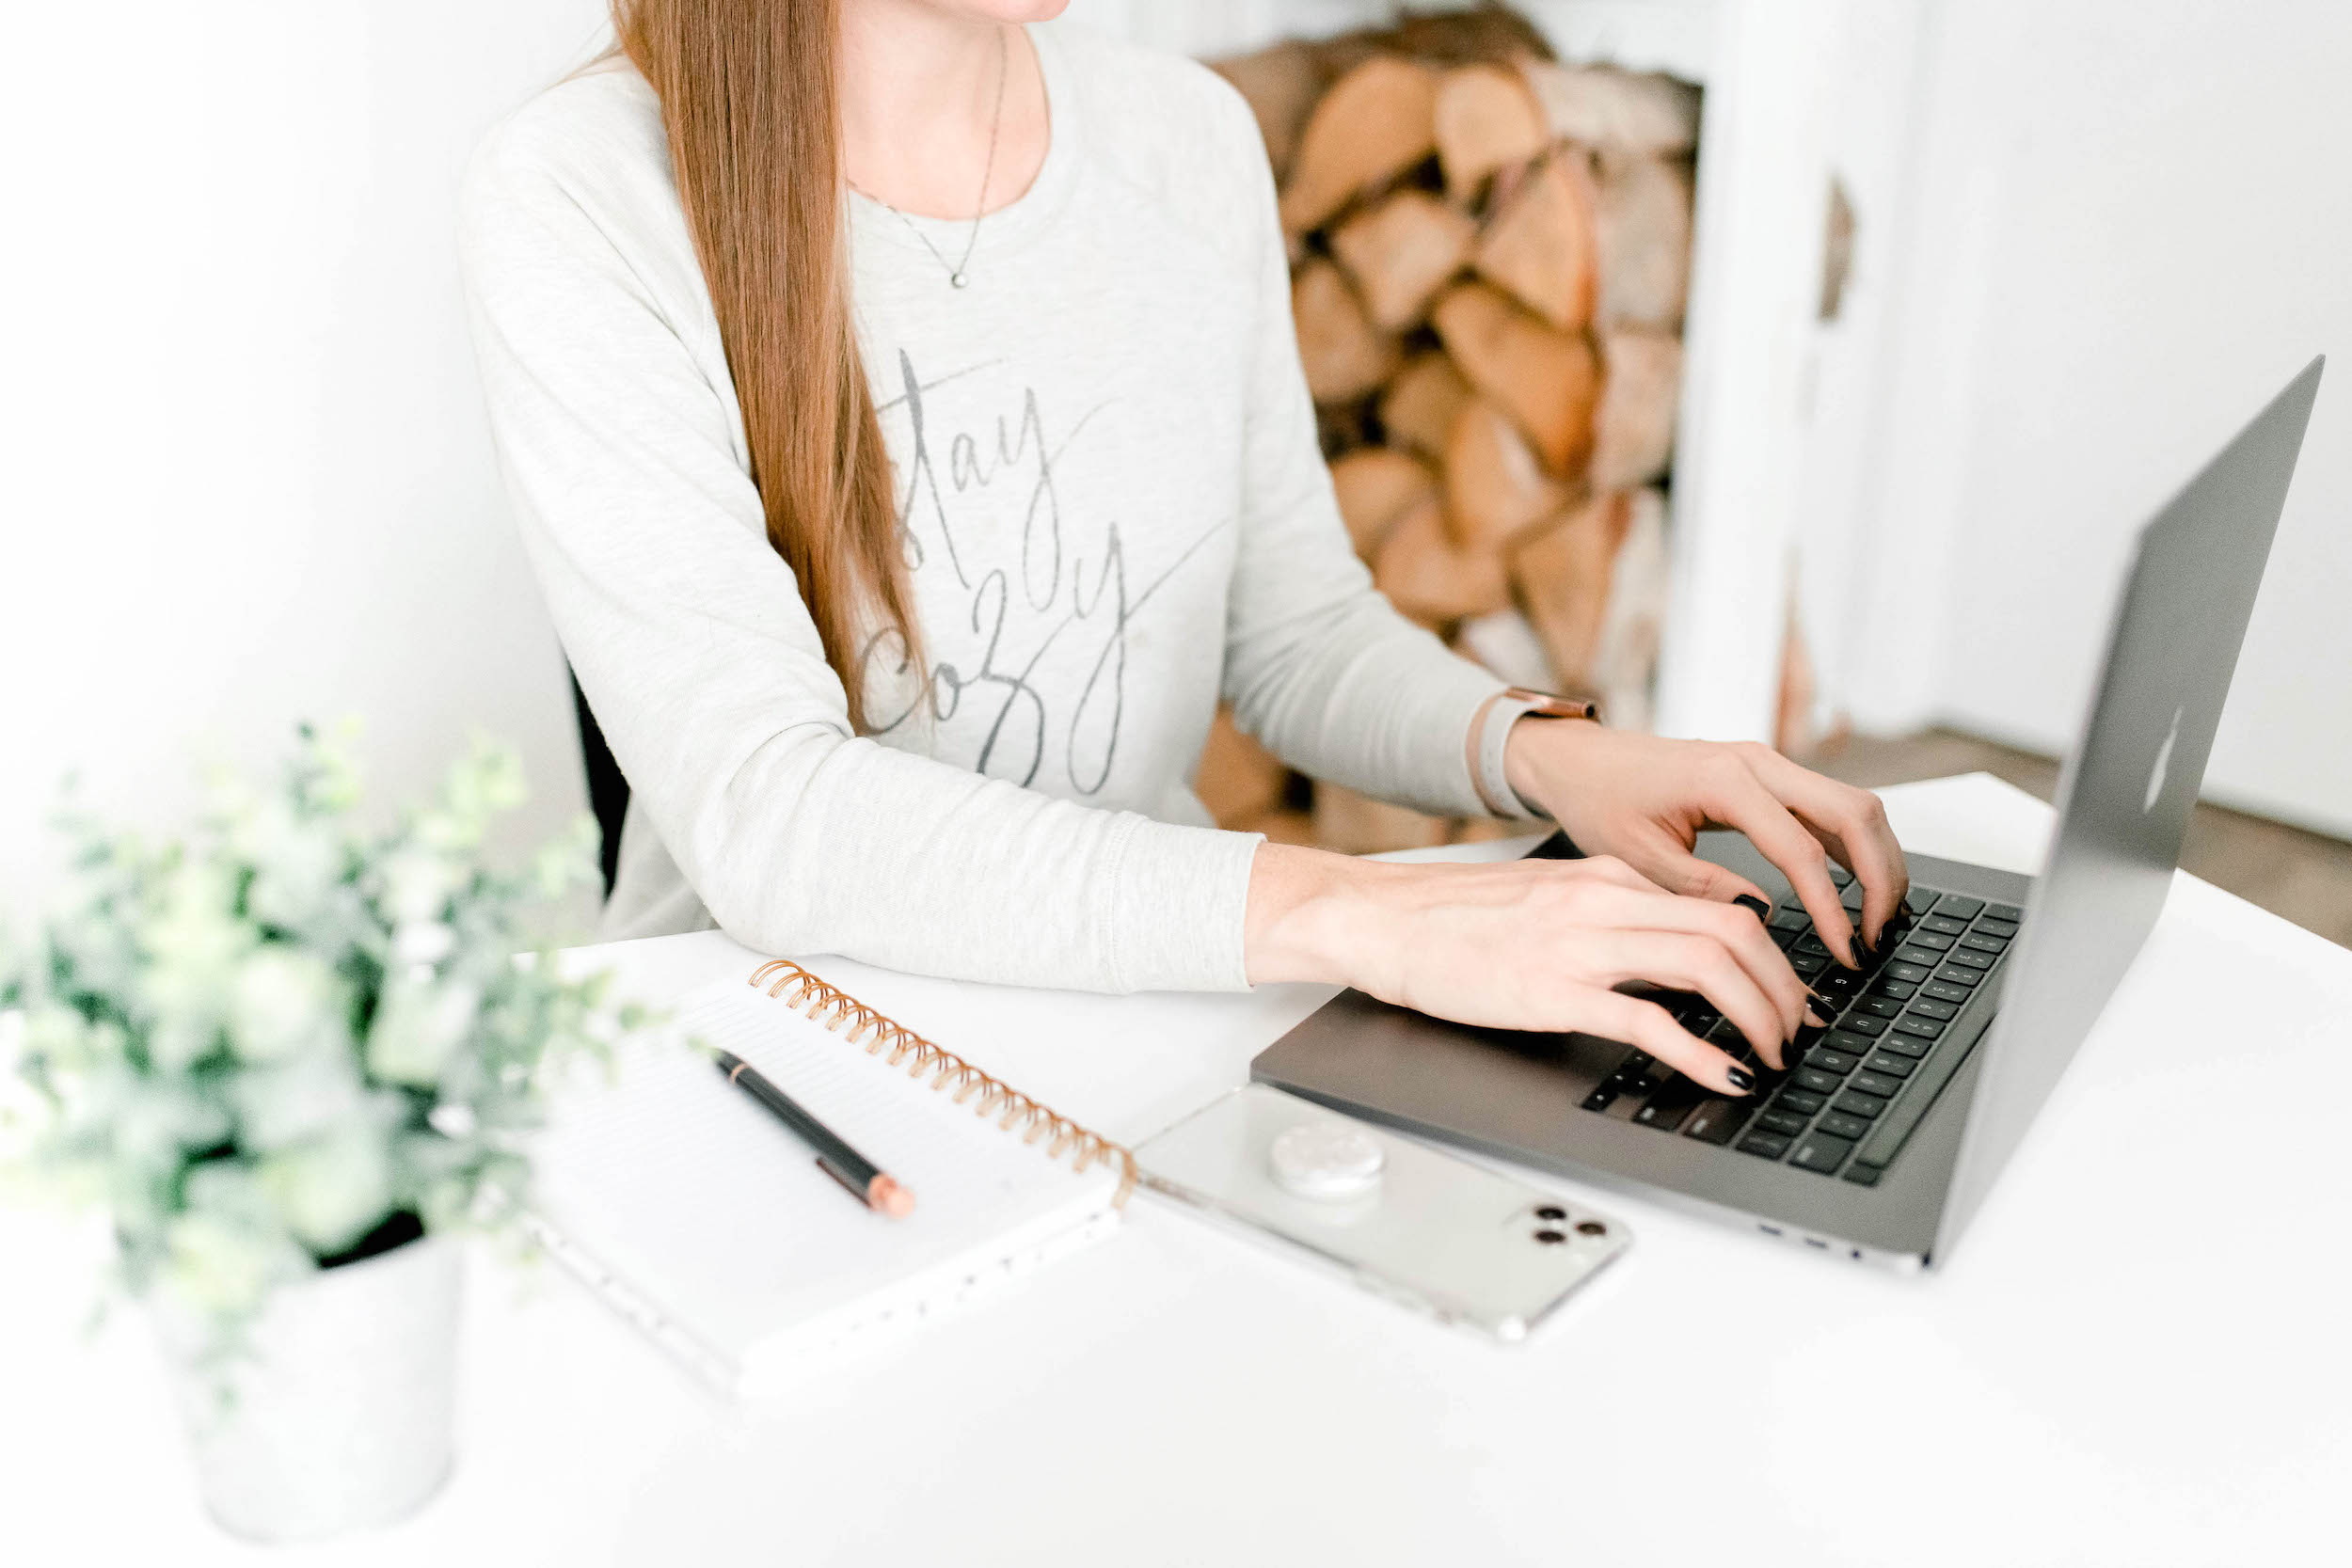 work from home | 3 ways to stay energized working a desk job